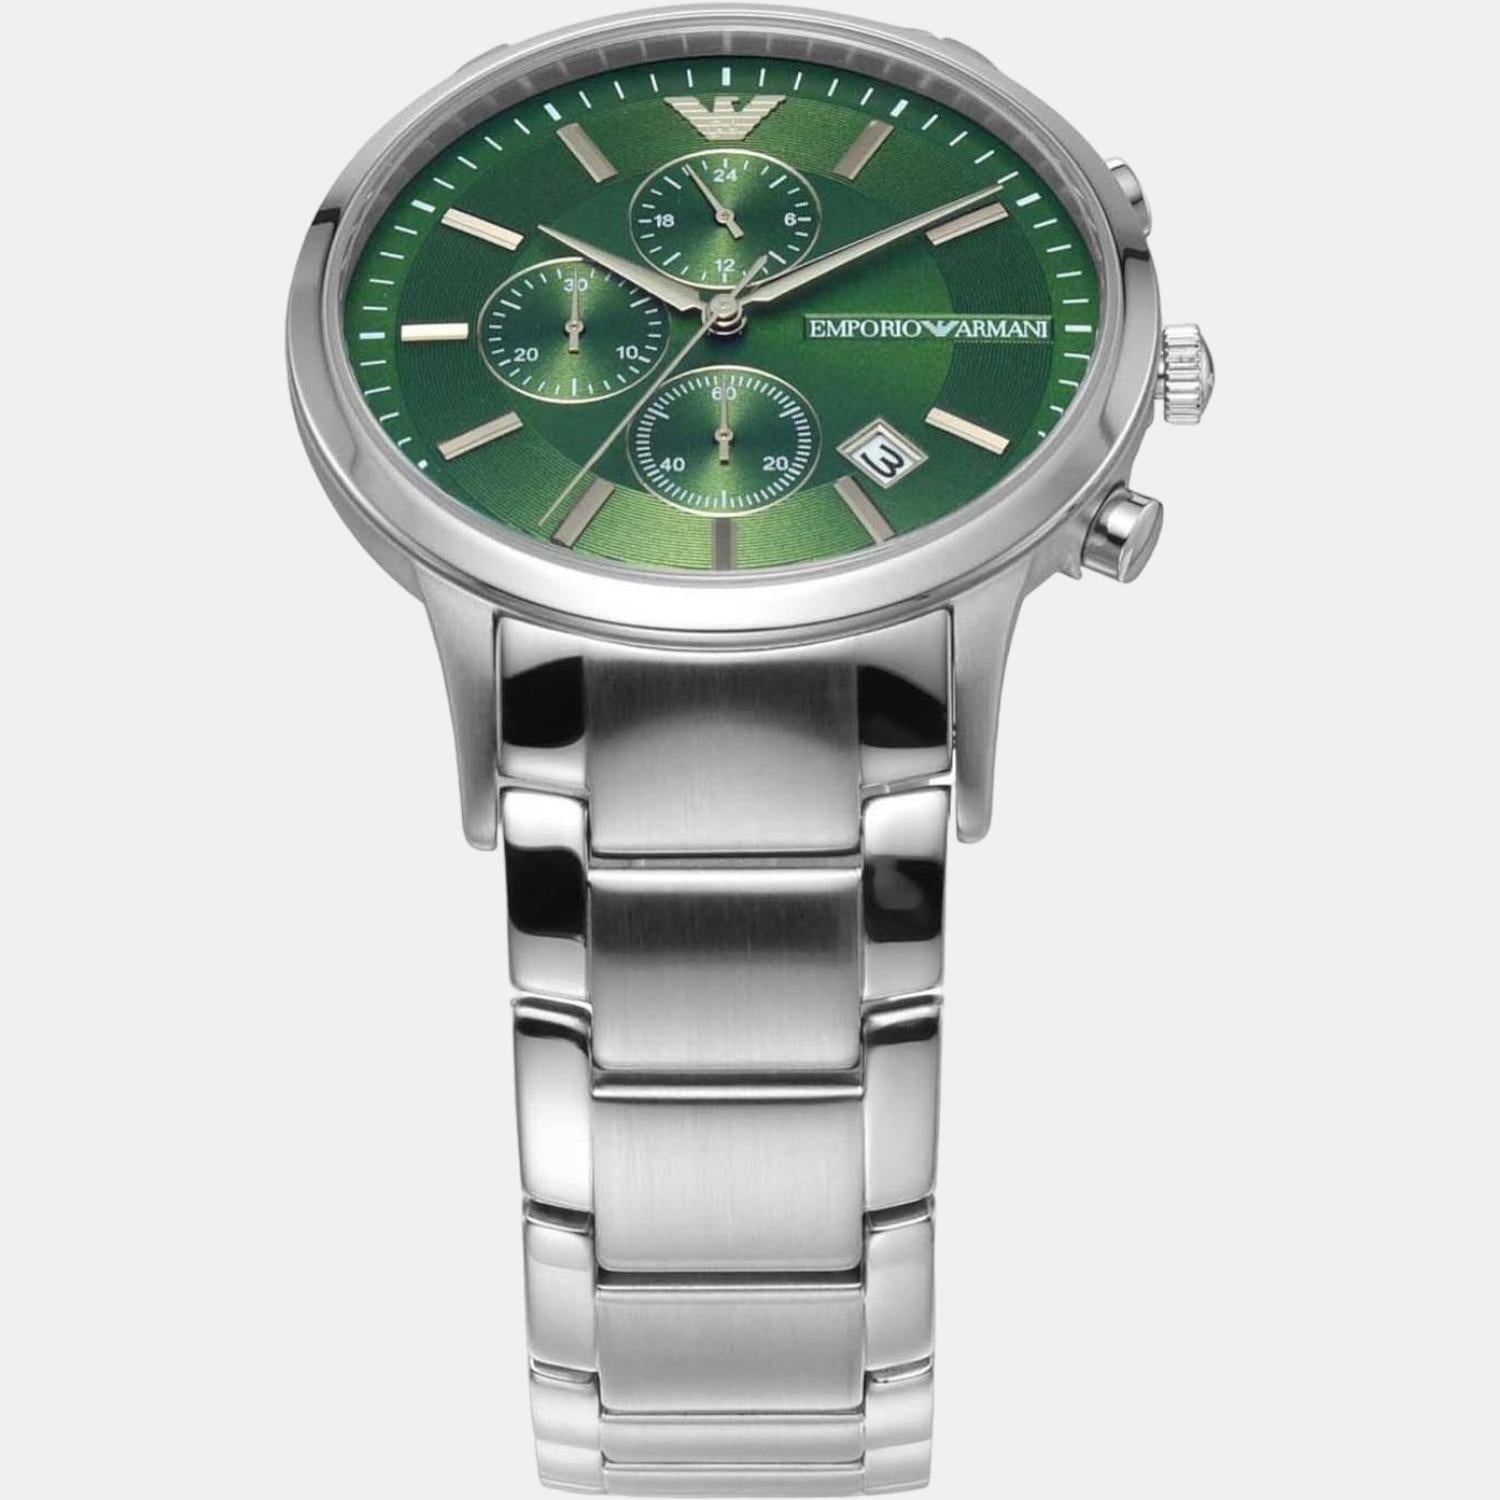 Emporio Armani Male Green Quartz Just | Armani Time Steel Watch Emporio In Chronograph – Stainless